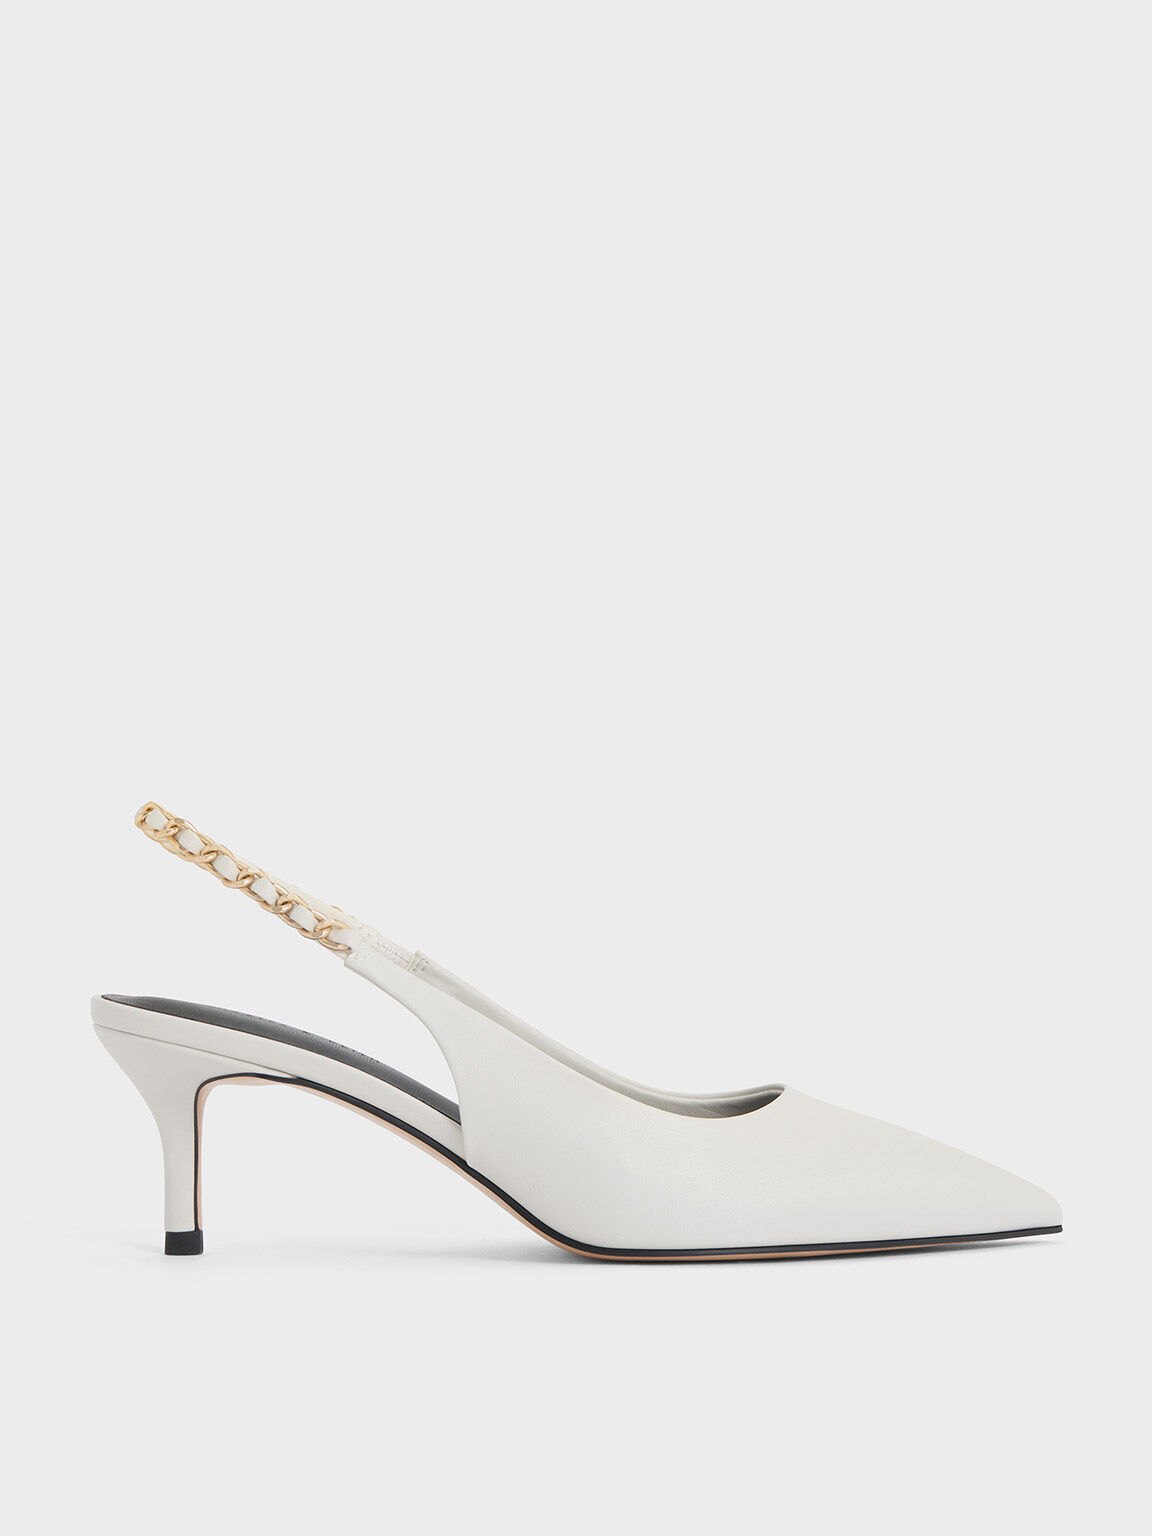 A Cynful Fiction: Charles & Keith Heels ~ Total Steal!